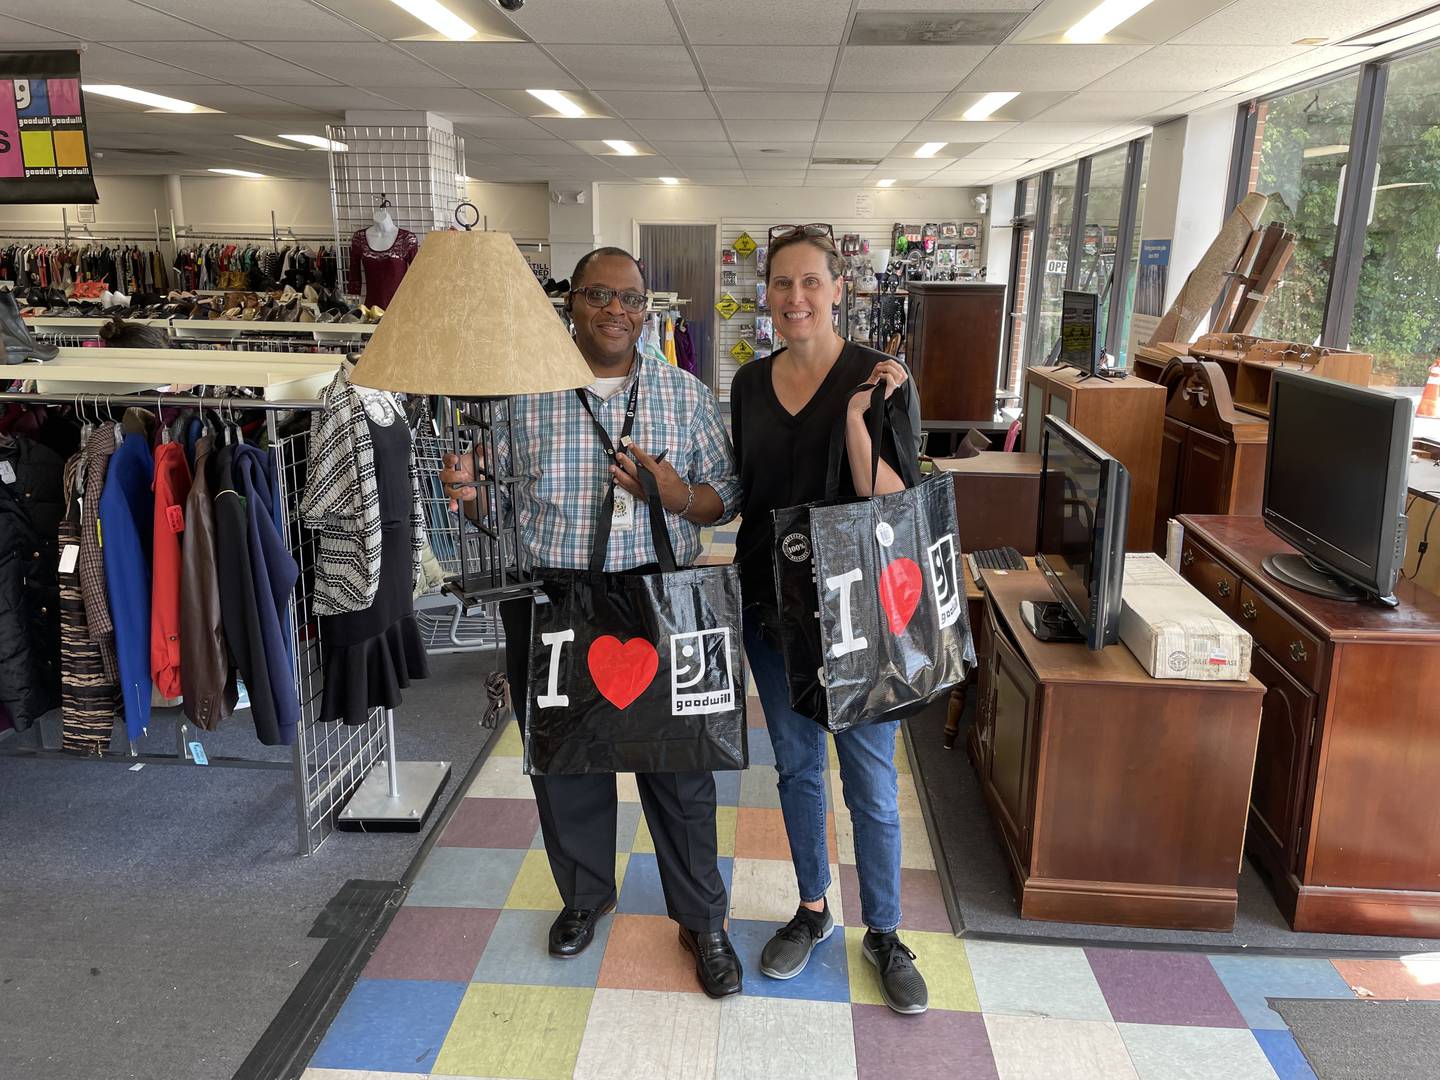 Work colleagues Uhmar Alston and Brenda Wintrode discovered they both love treasure hunting at thrift stores. Alston, an executive assistant, and Wintrode, a state government reporter at The Baltimore Banner are pictured here with their purchases at the Goodwill Retail Store at 6999 Reisterstown Rd. in Baltimore on August 26, 2022.